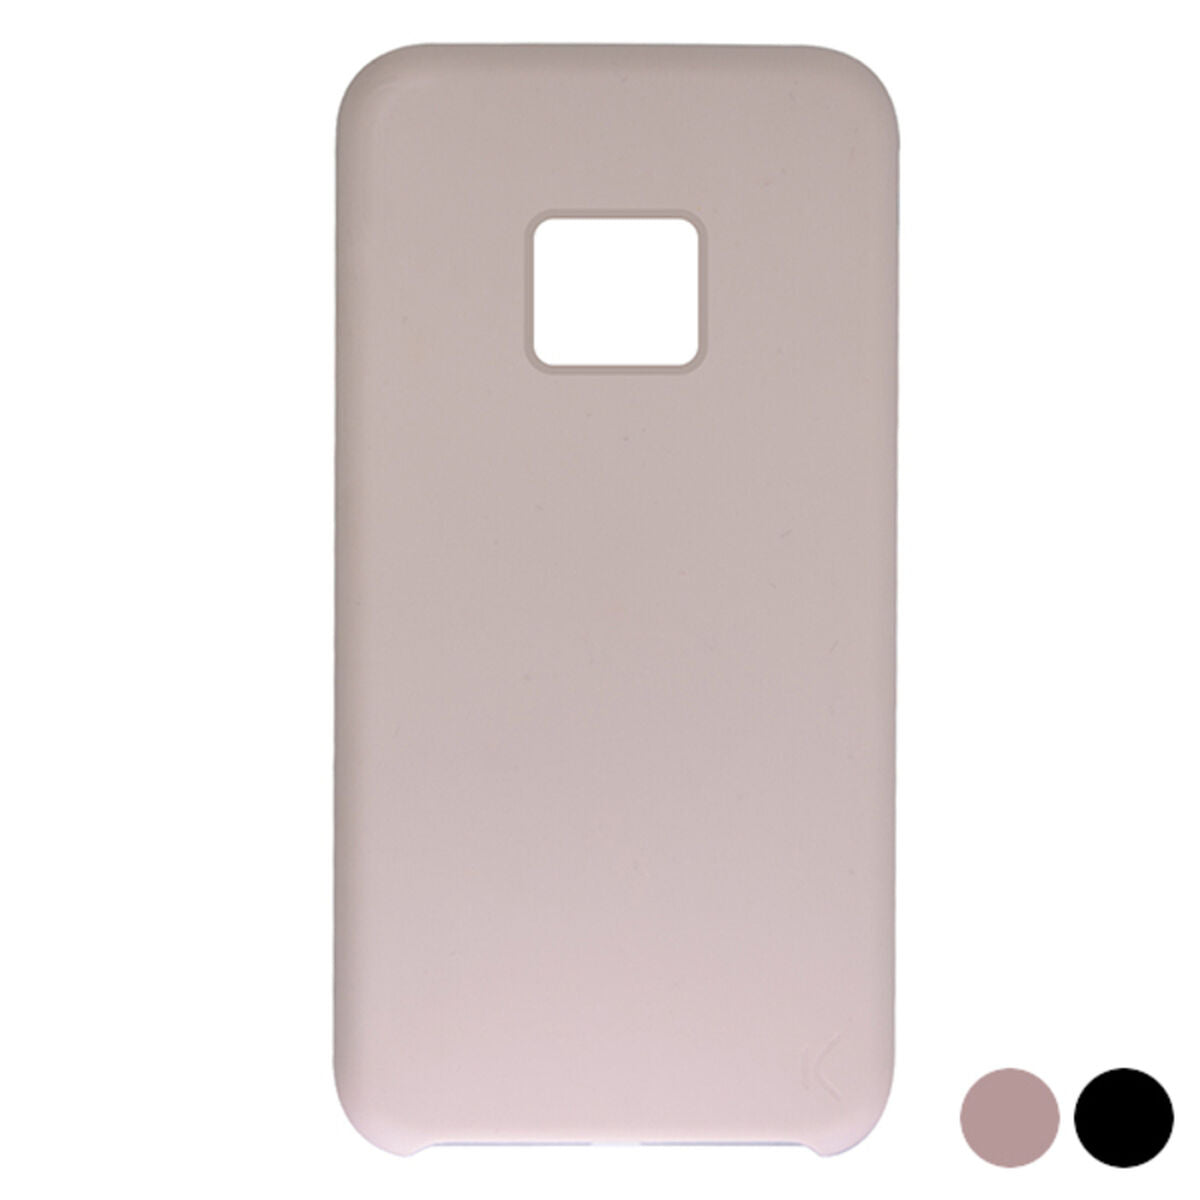 Protection pour téléphone portable Huawei Mate 20 Pro KSIX Soft Silicone Huawei